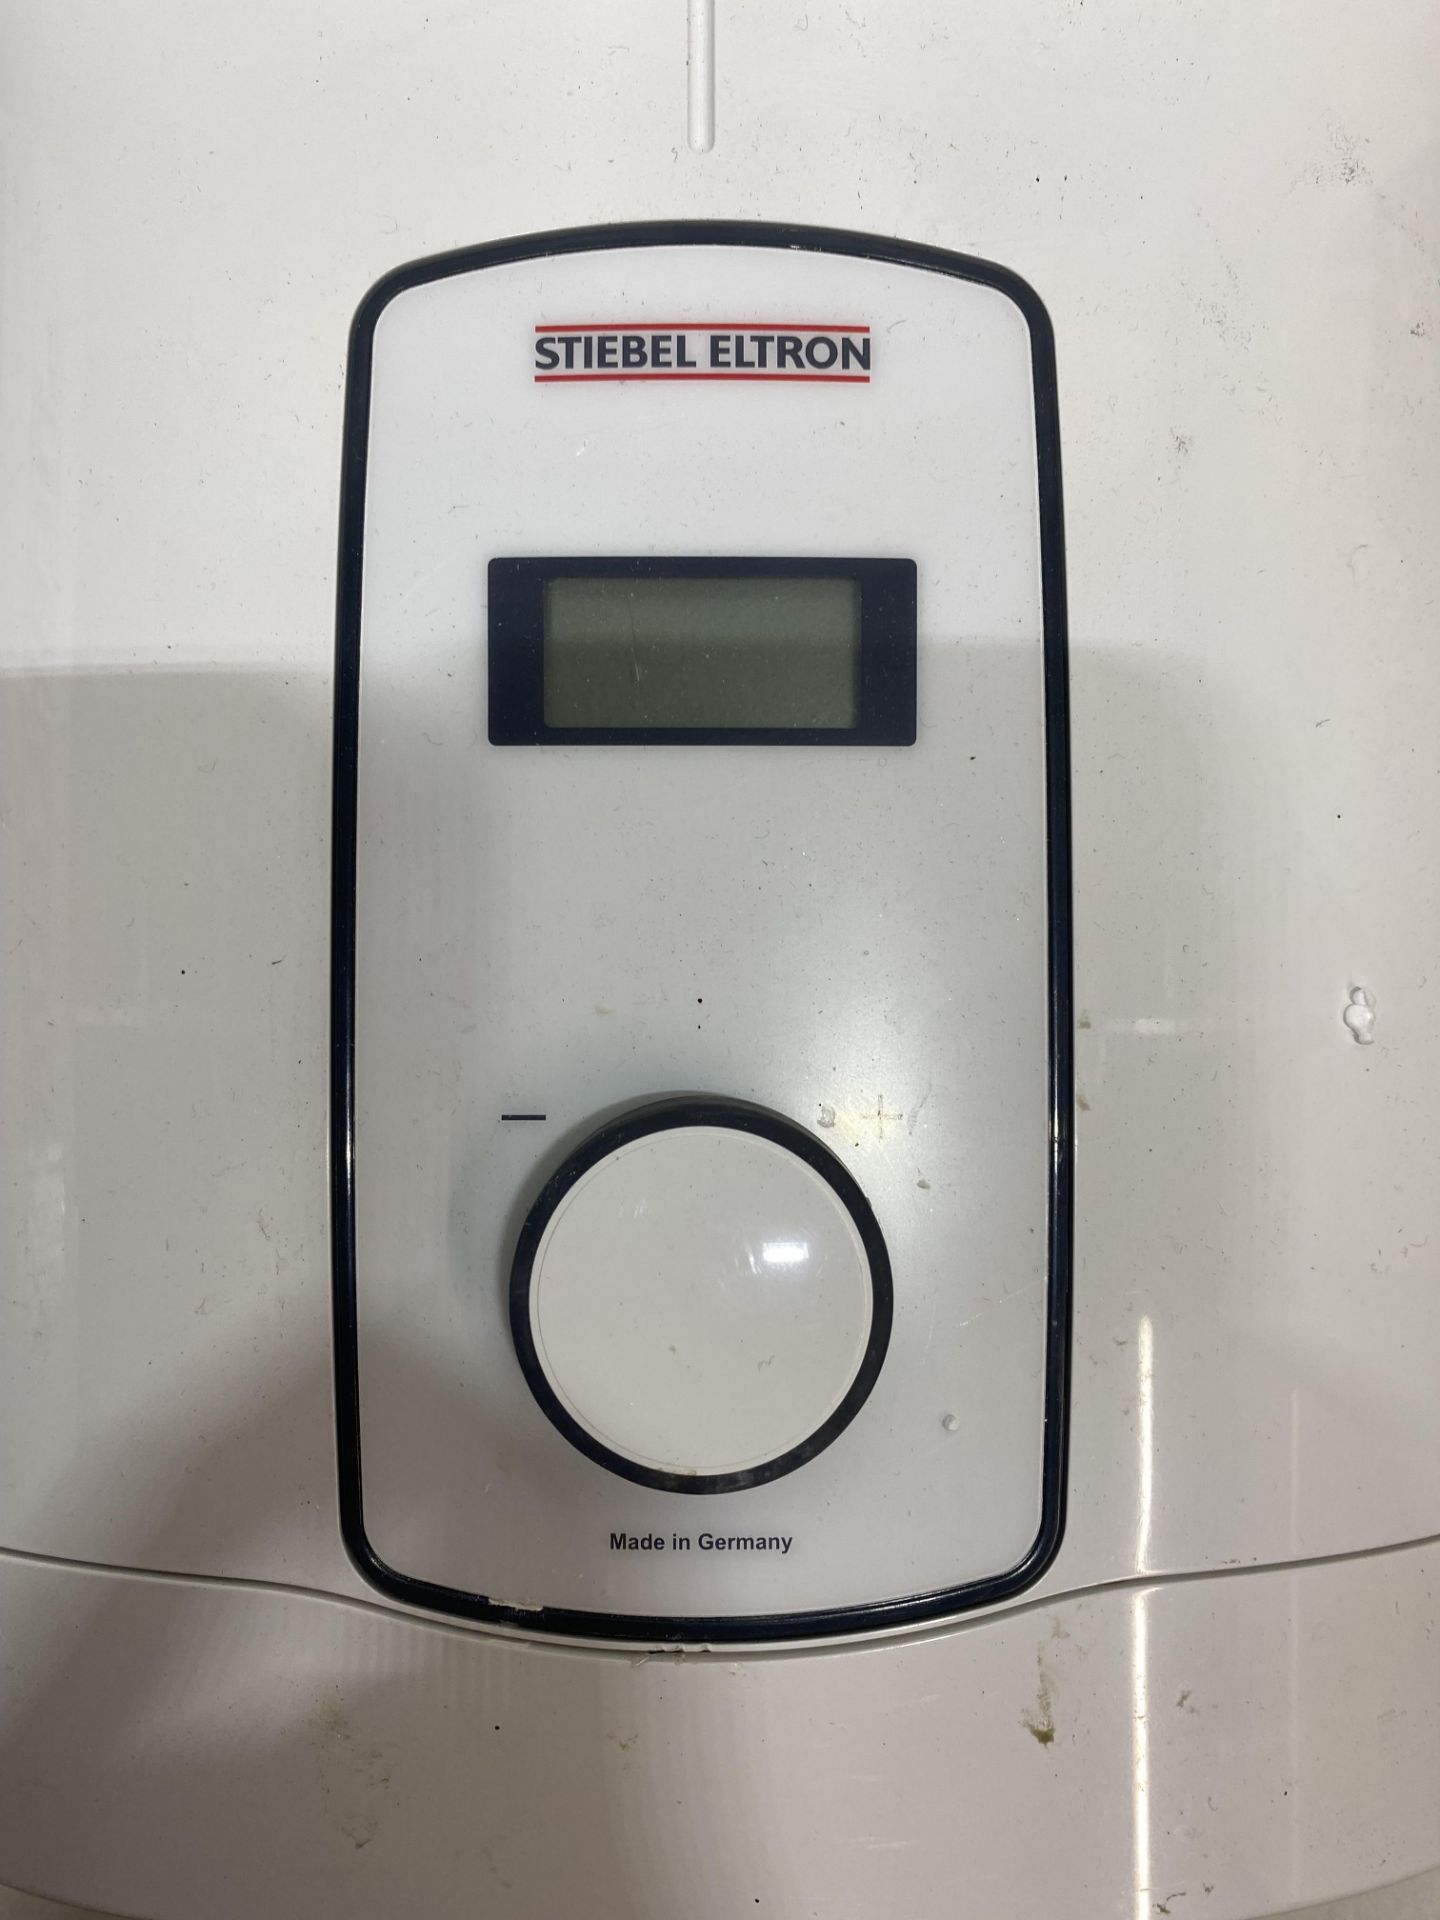 Stiebel Eltron DHB-E 18/21/24 LCD Comfort Instantaneous Water Heater - Image 3 of 7